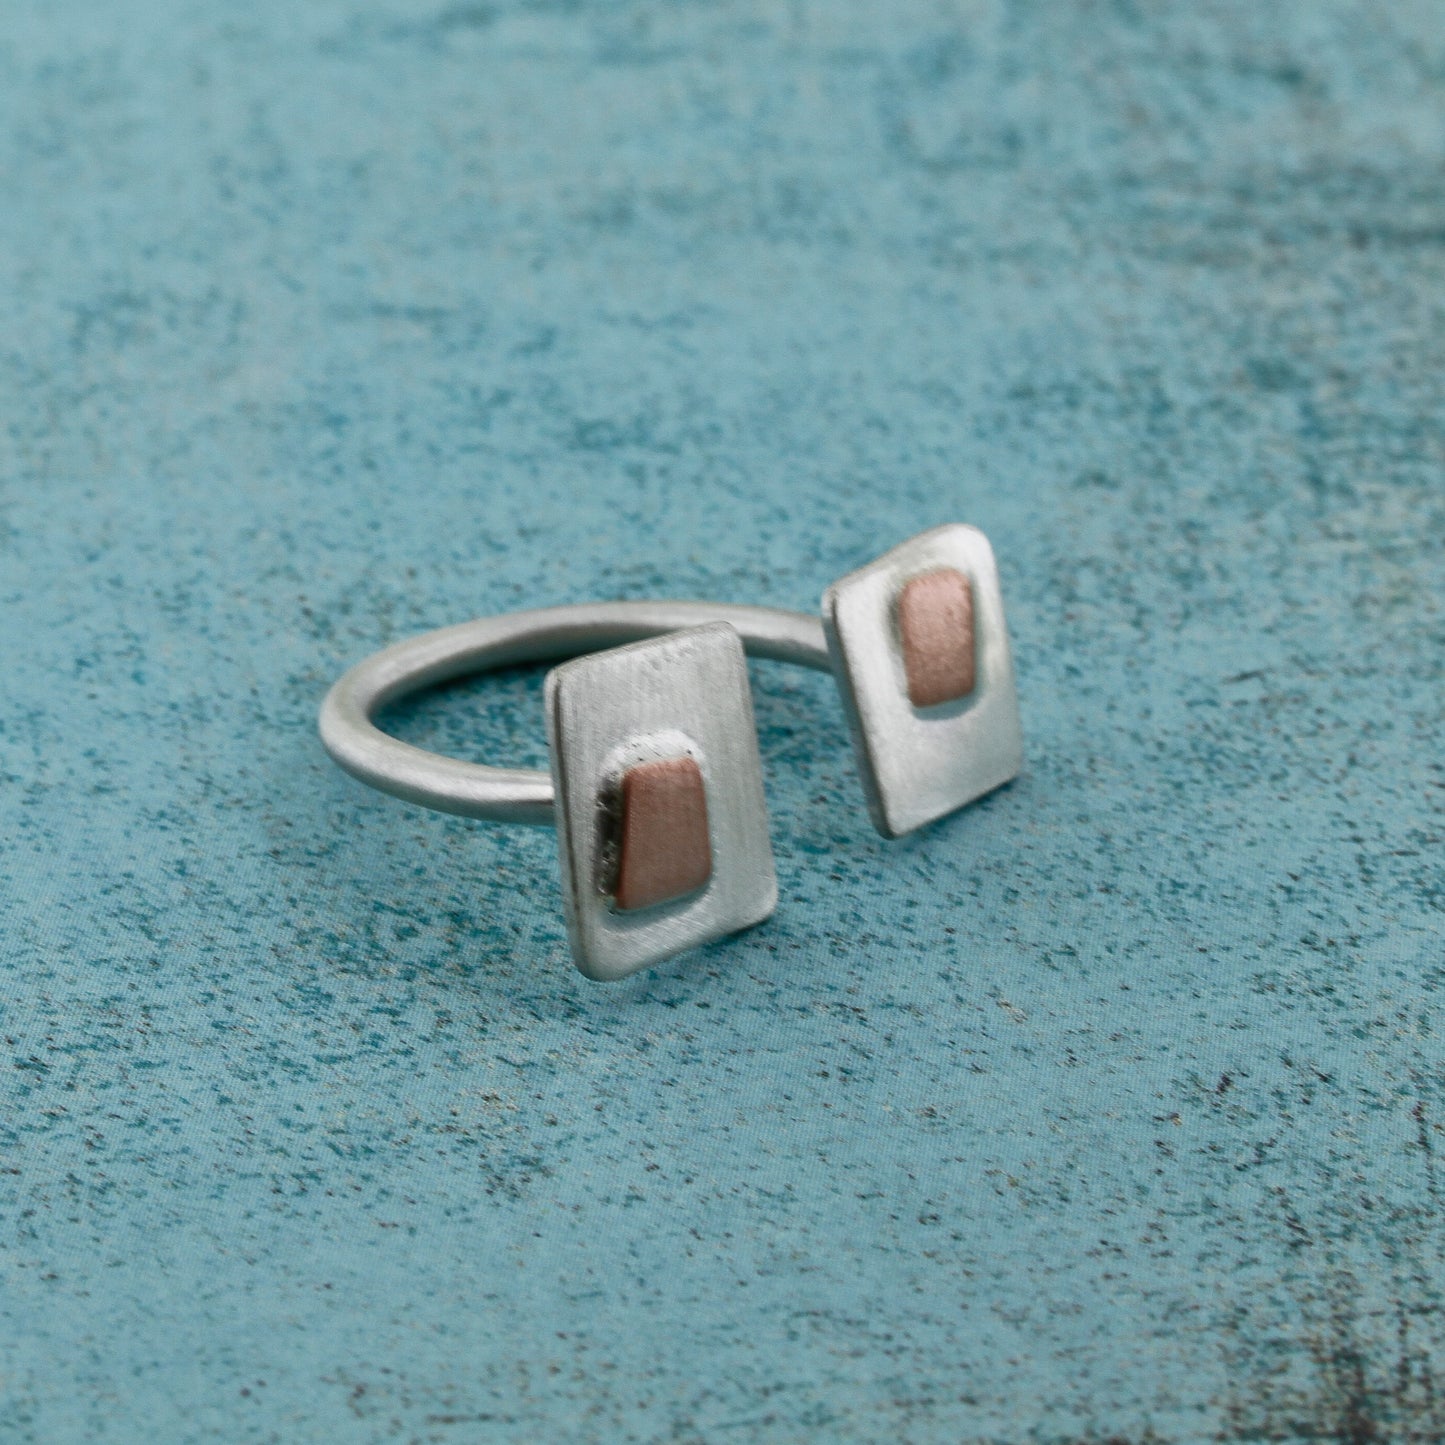 In between the finger ring inspired by mid century design